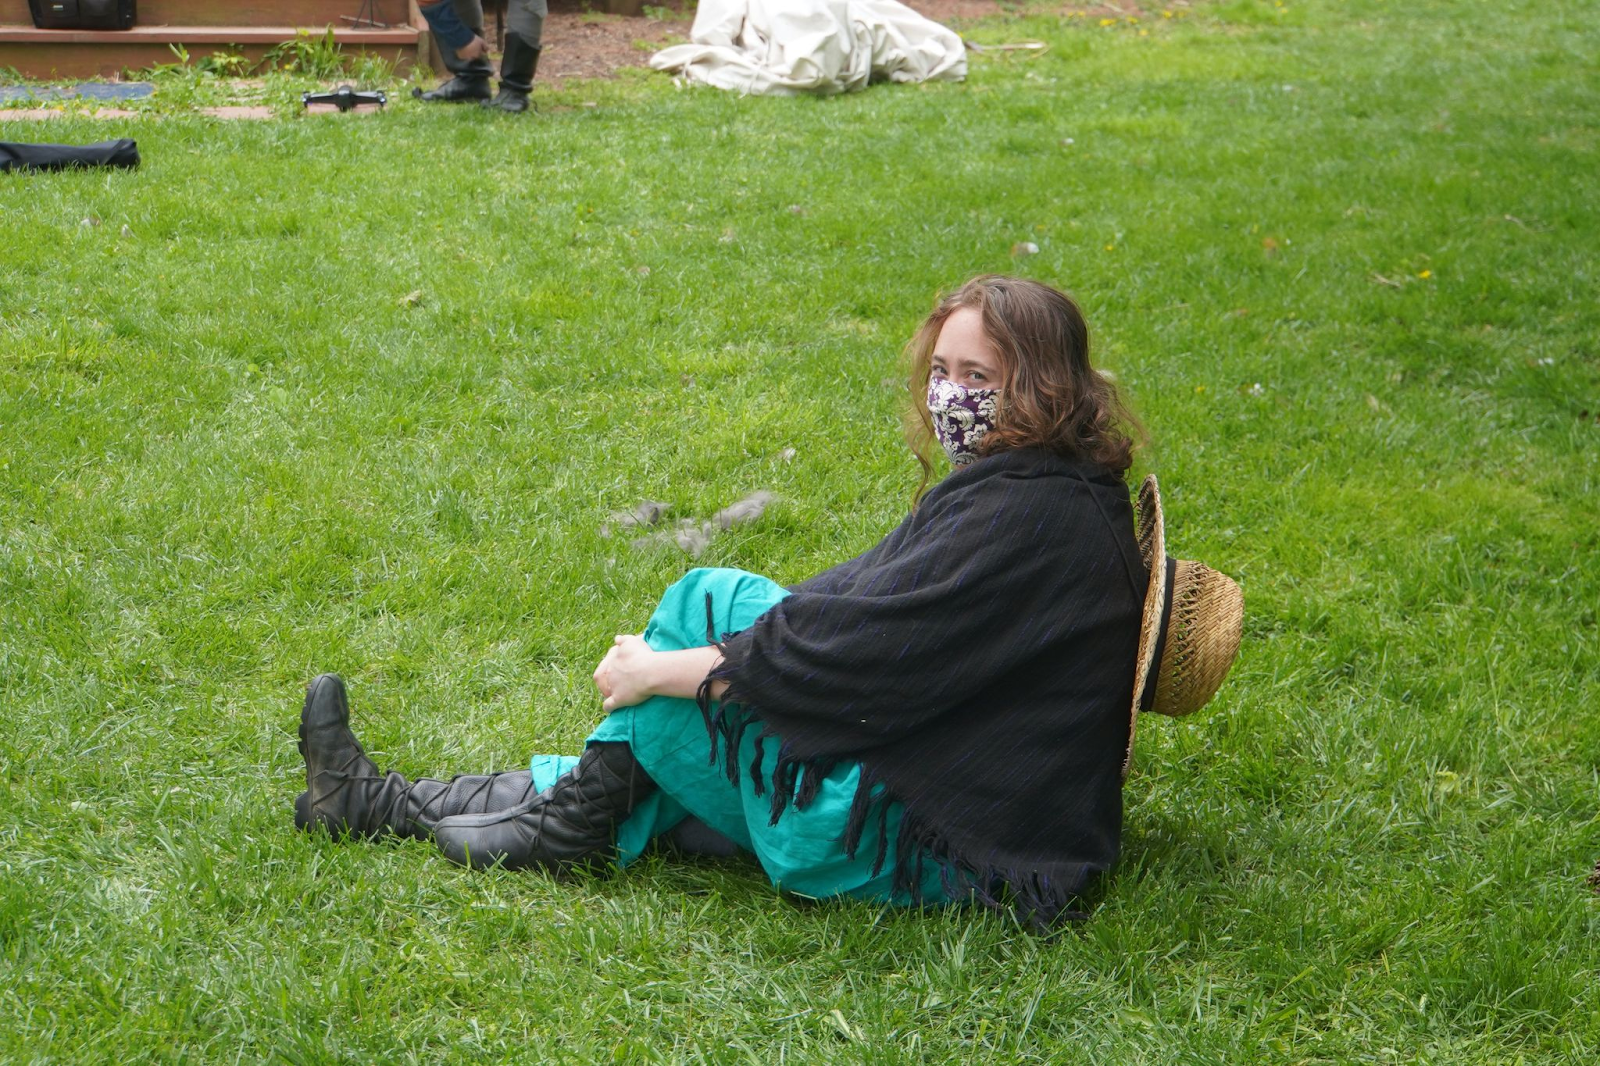 A person sits profile on the grass, one leg stretched out in front of them, but head turned to face the camera. They are wearing black boots, a tea dress, a black shawl, a purple patterned mask, and have a straw hat on their back.